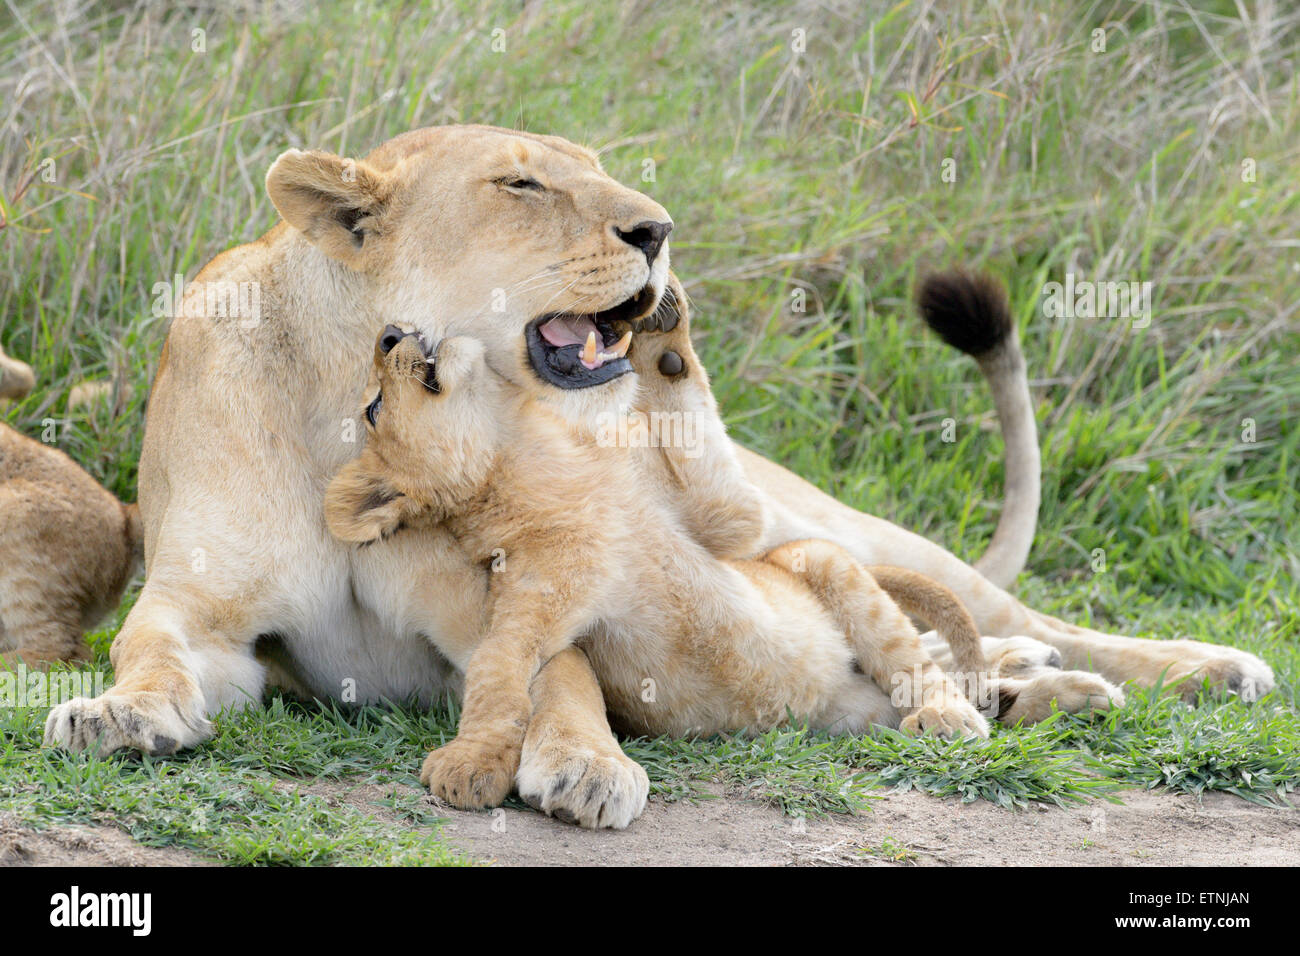 Lion cubs (Panthera leo) playing with lioness mother on the savanna, Serengeti national park, Tanzania. Stock Photo